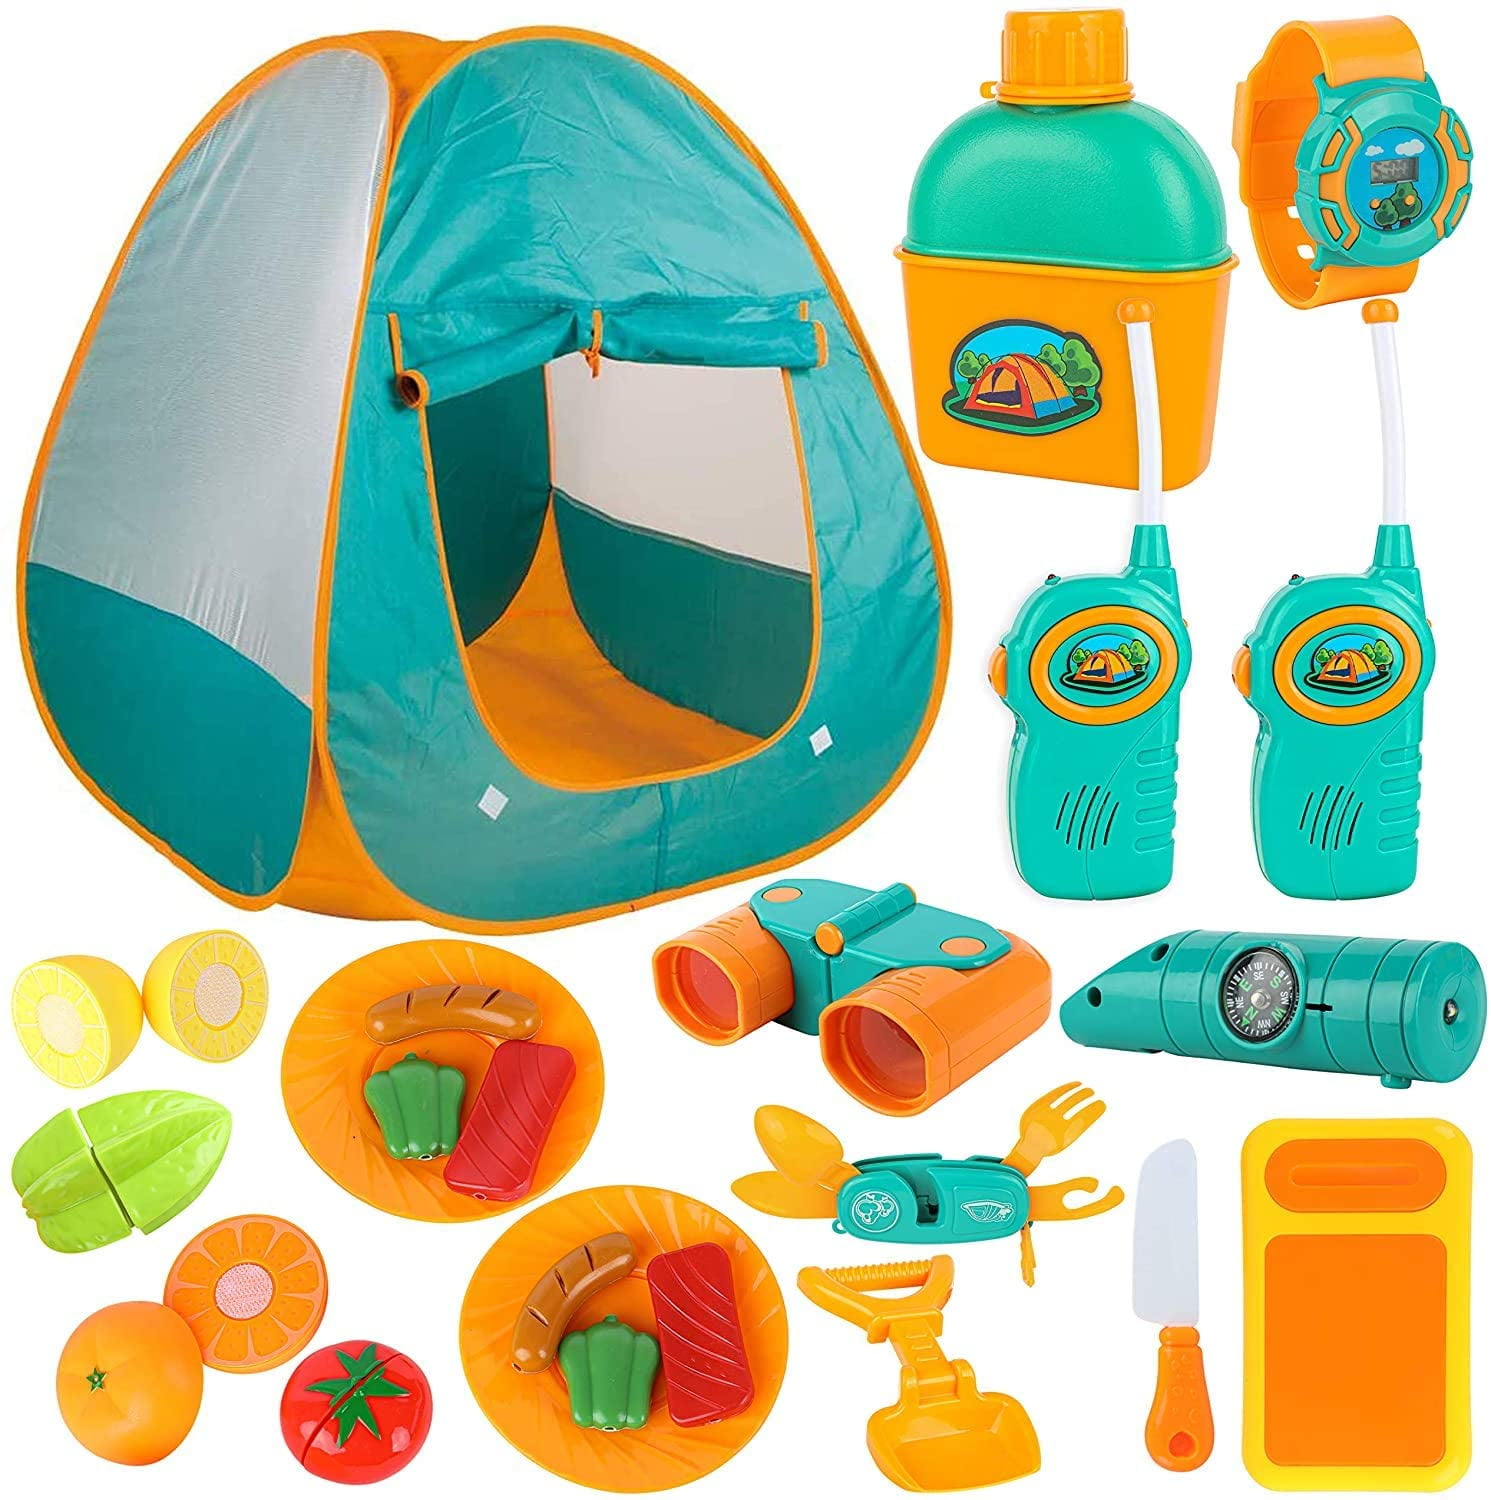 Camping gifts for kids: 50+ fun camping gift ideas for kids · The Global  Wizards - Travel Blog